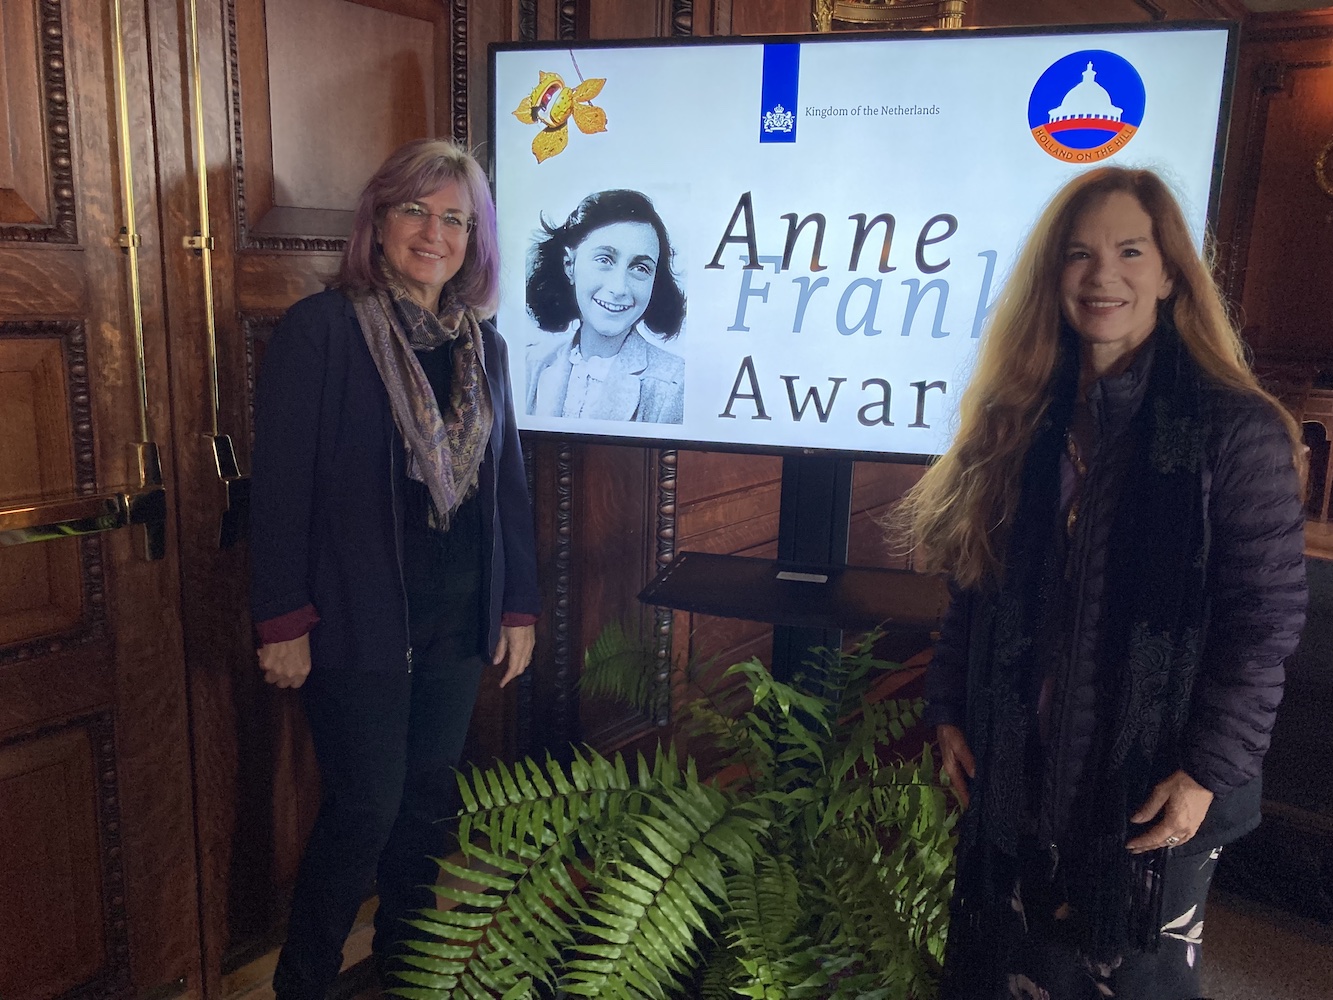 Noreen & Rachelle at the Anne Frank Awards Ceremony